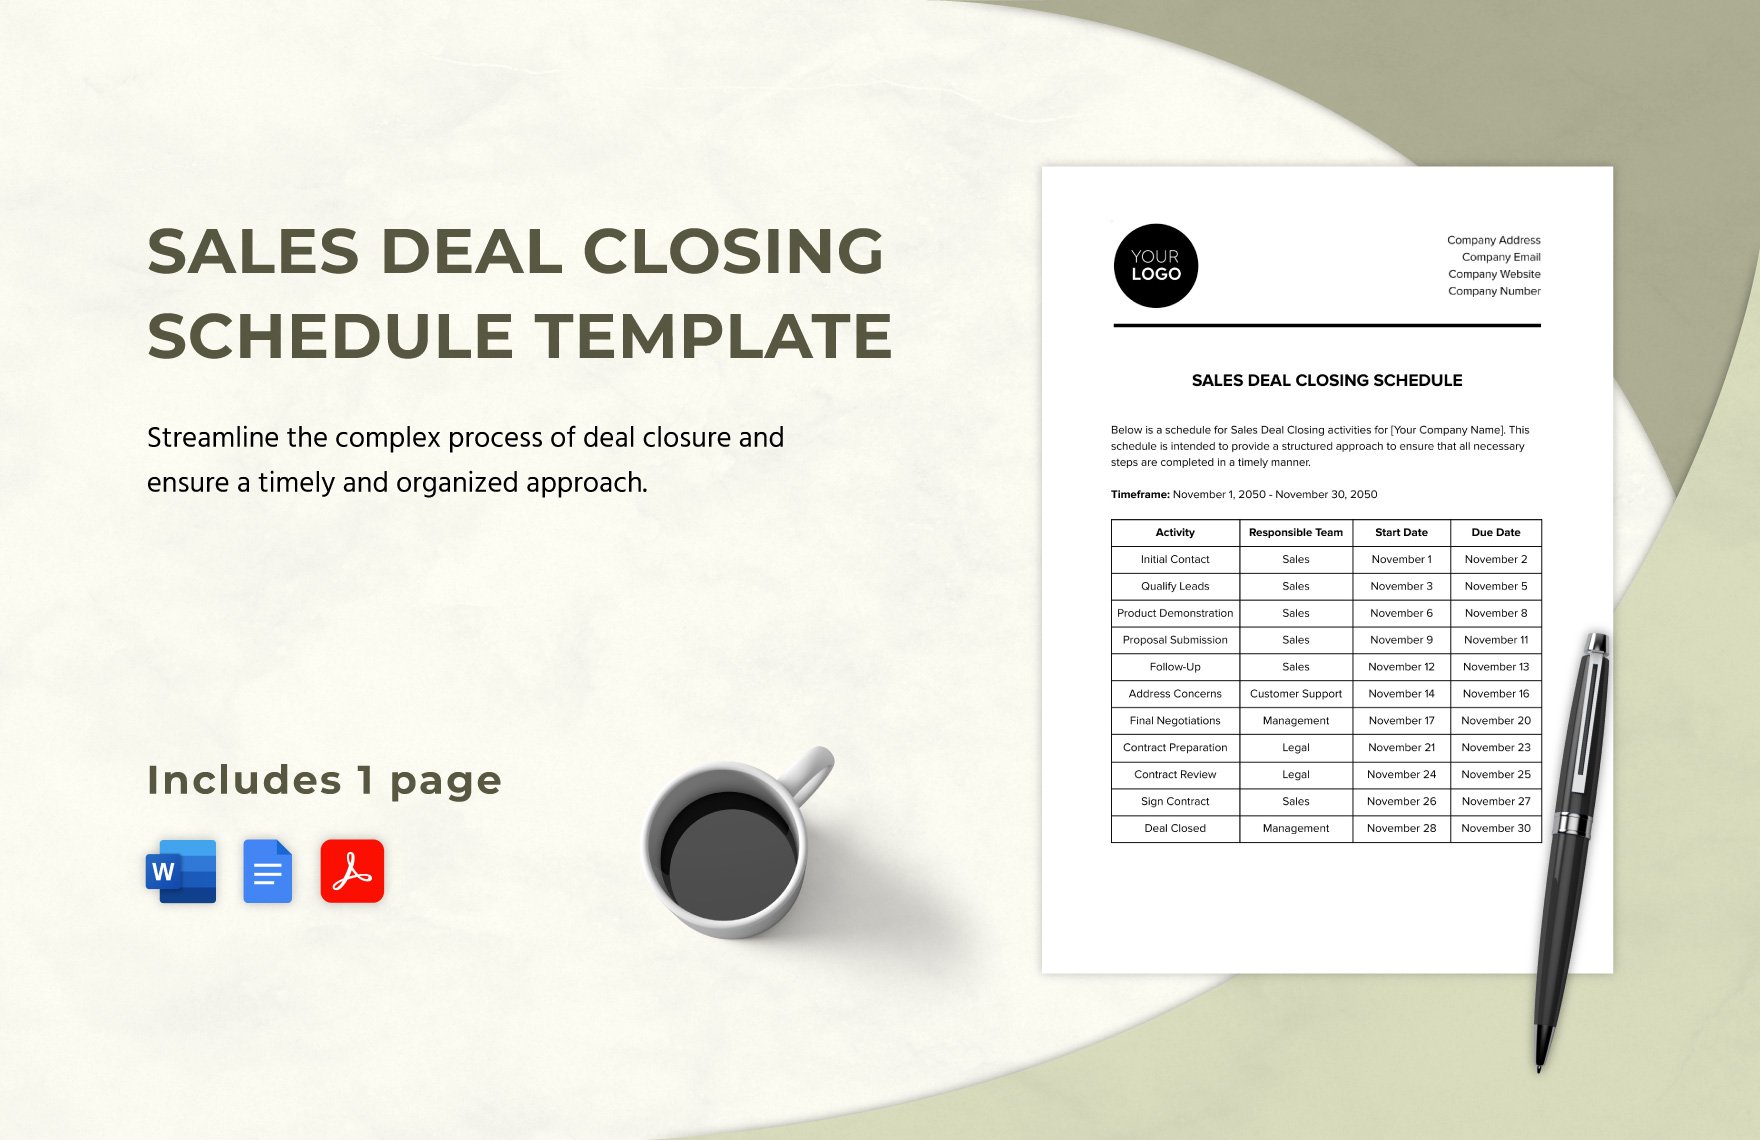 Sales Deal Closing Schedule Template in Word, Google Docs, PDF